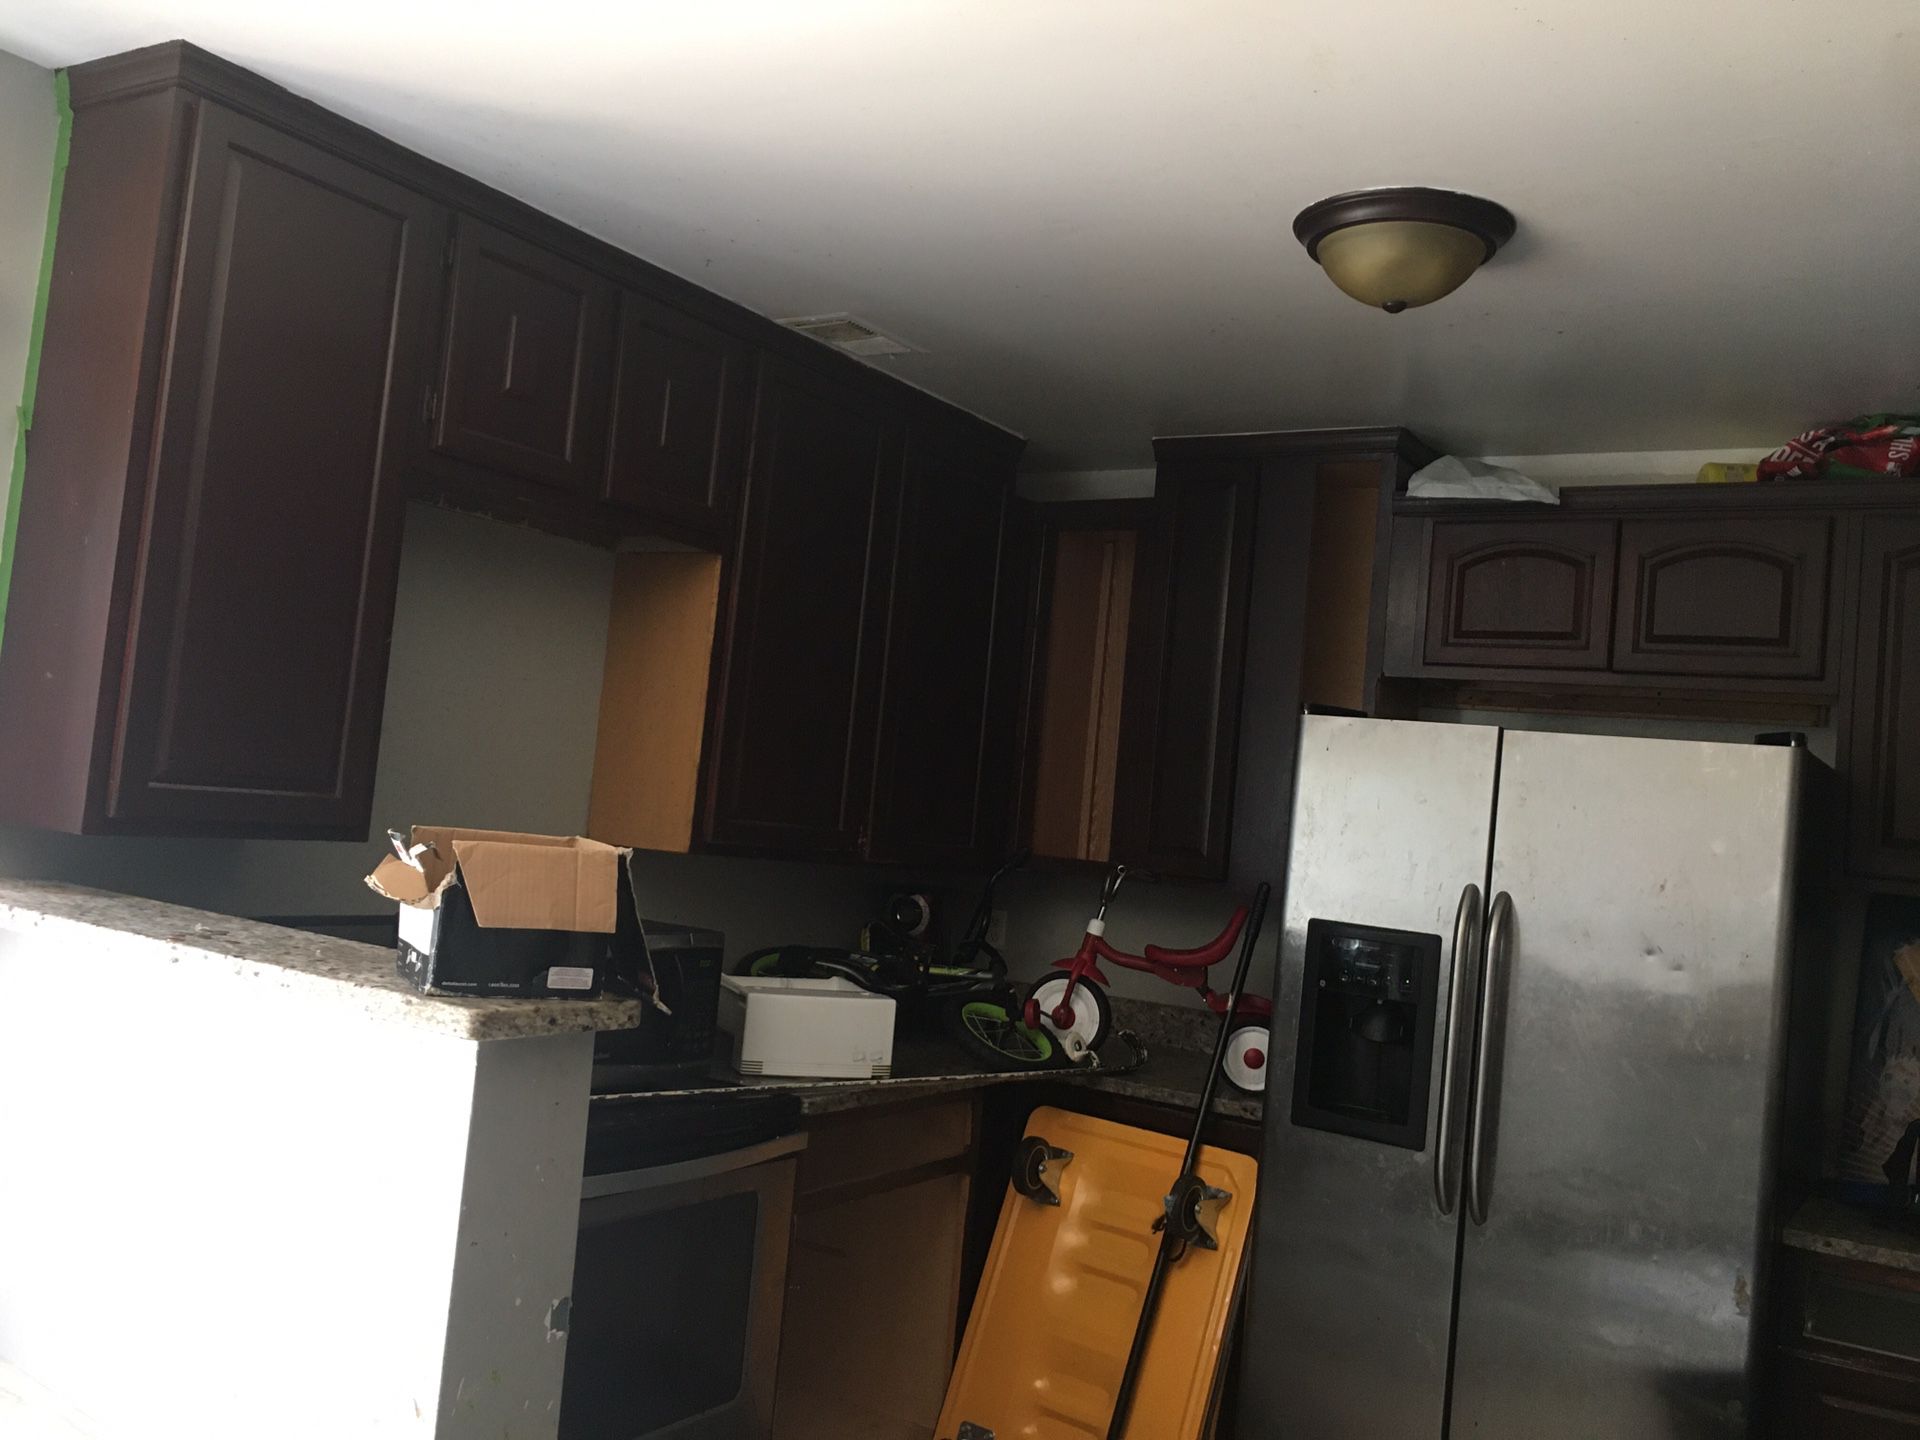 Above kitchen cabinets